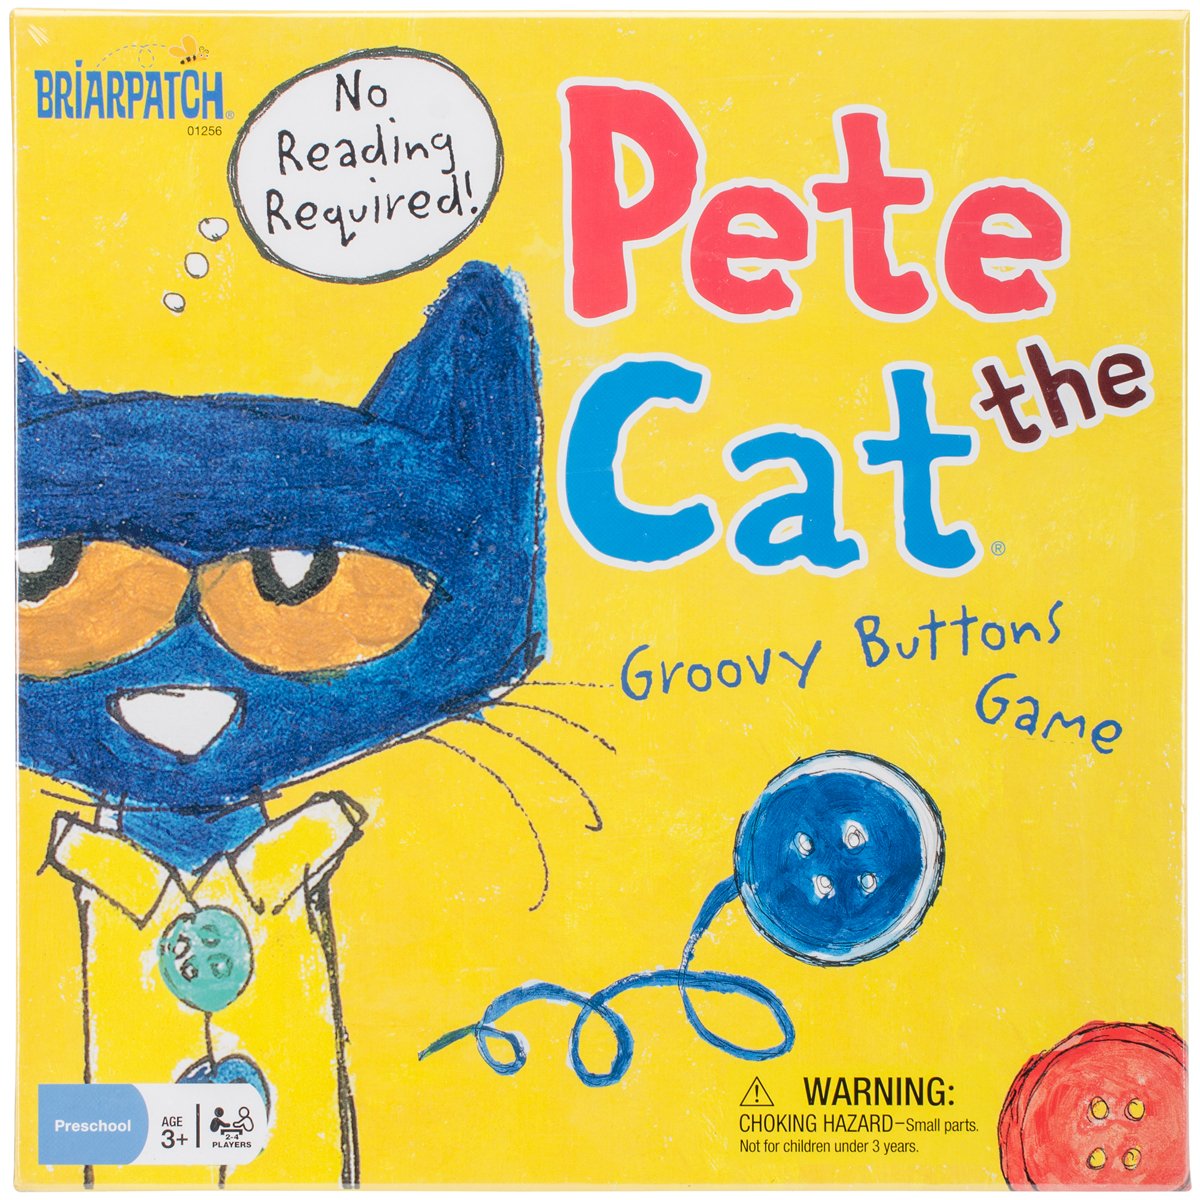 University Games Bp01256 Pete The Cat Groovy Buttons Game